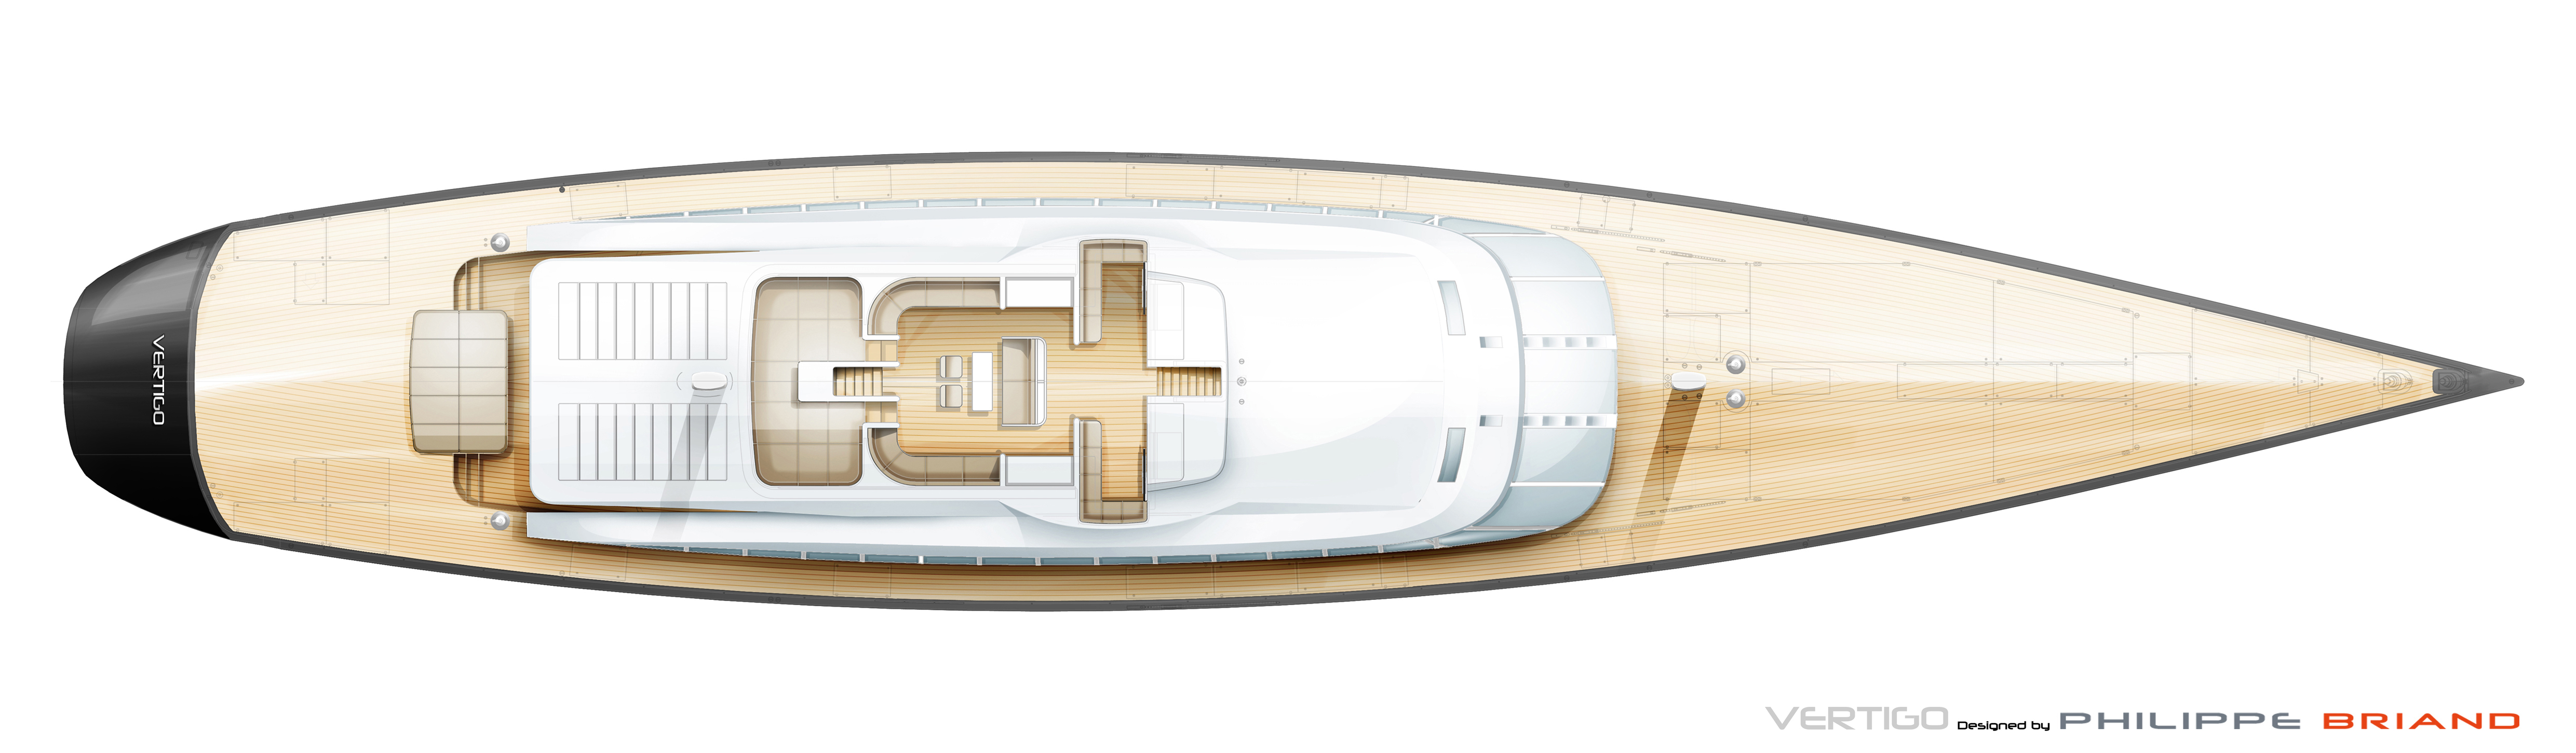 Deck plan - Image courtesy of Philippe Briand - Alloy Sailing Yacht 